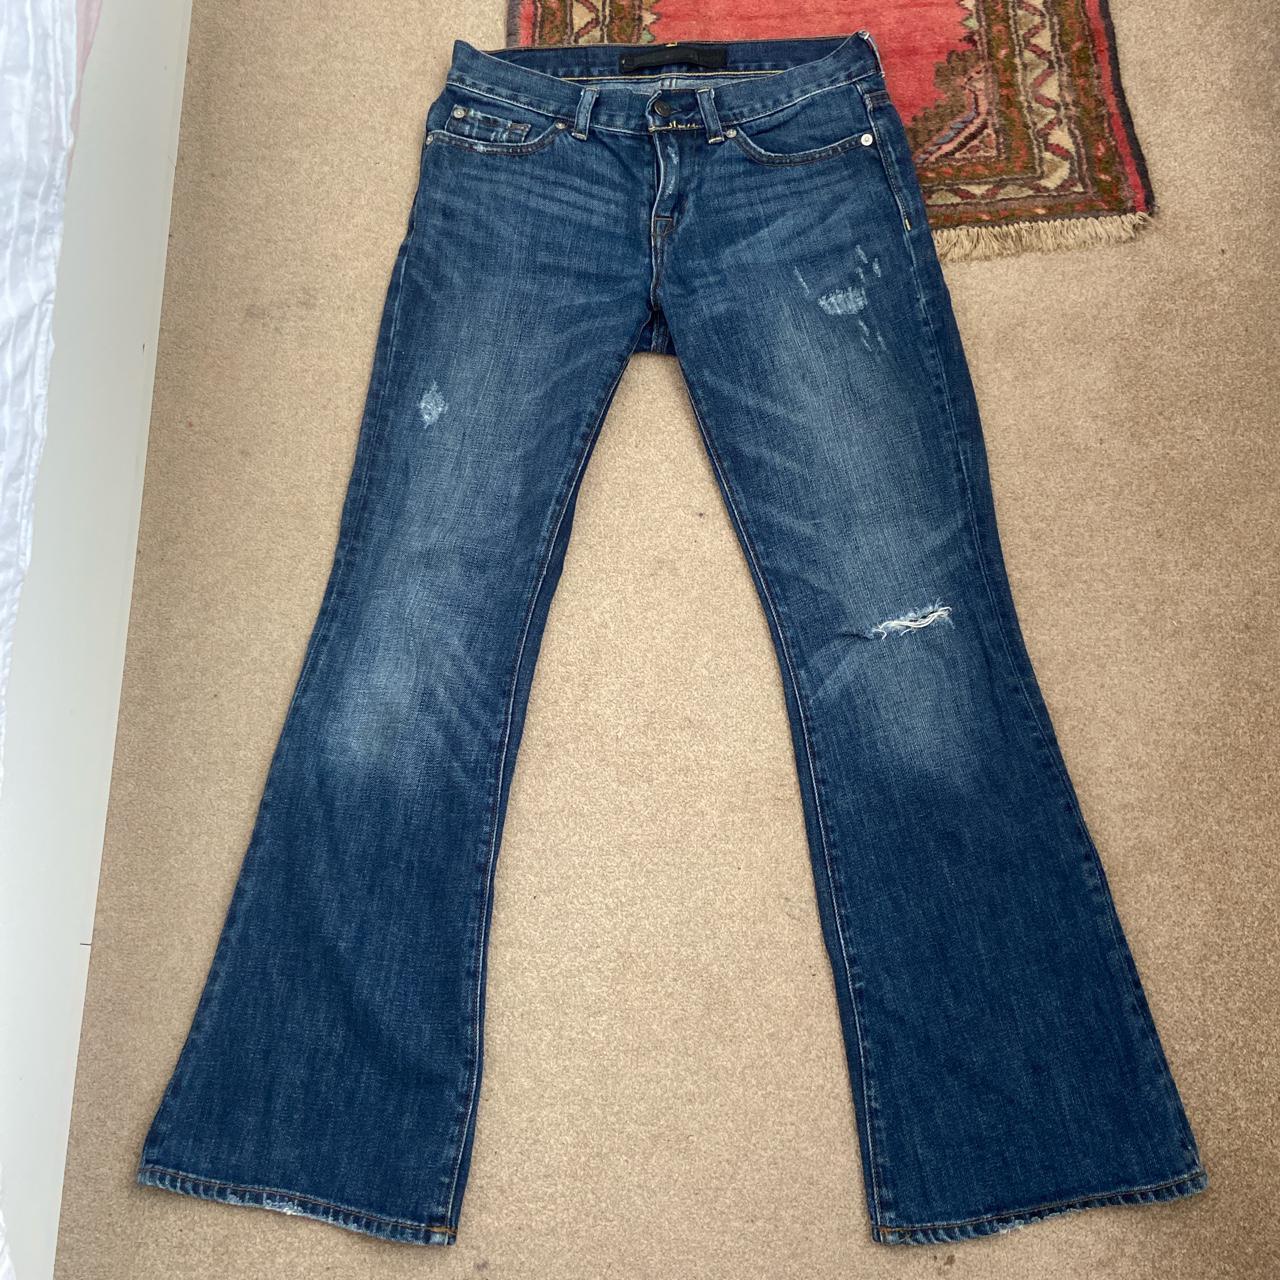 Vintage dark wash low waisted flared jeans with... - Depop